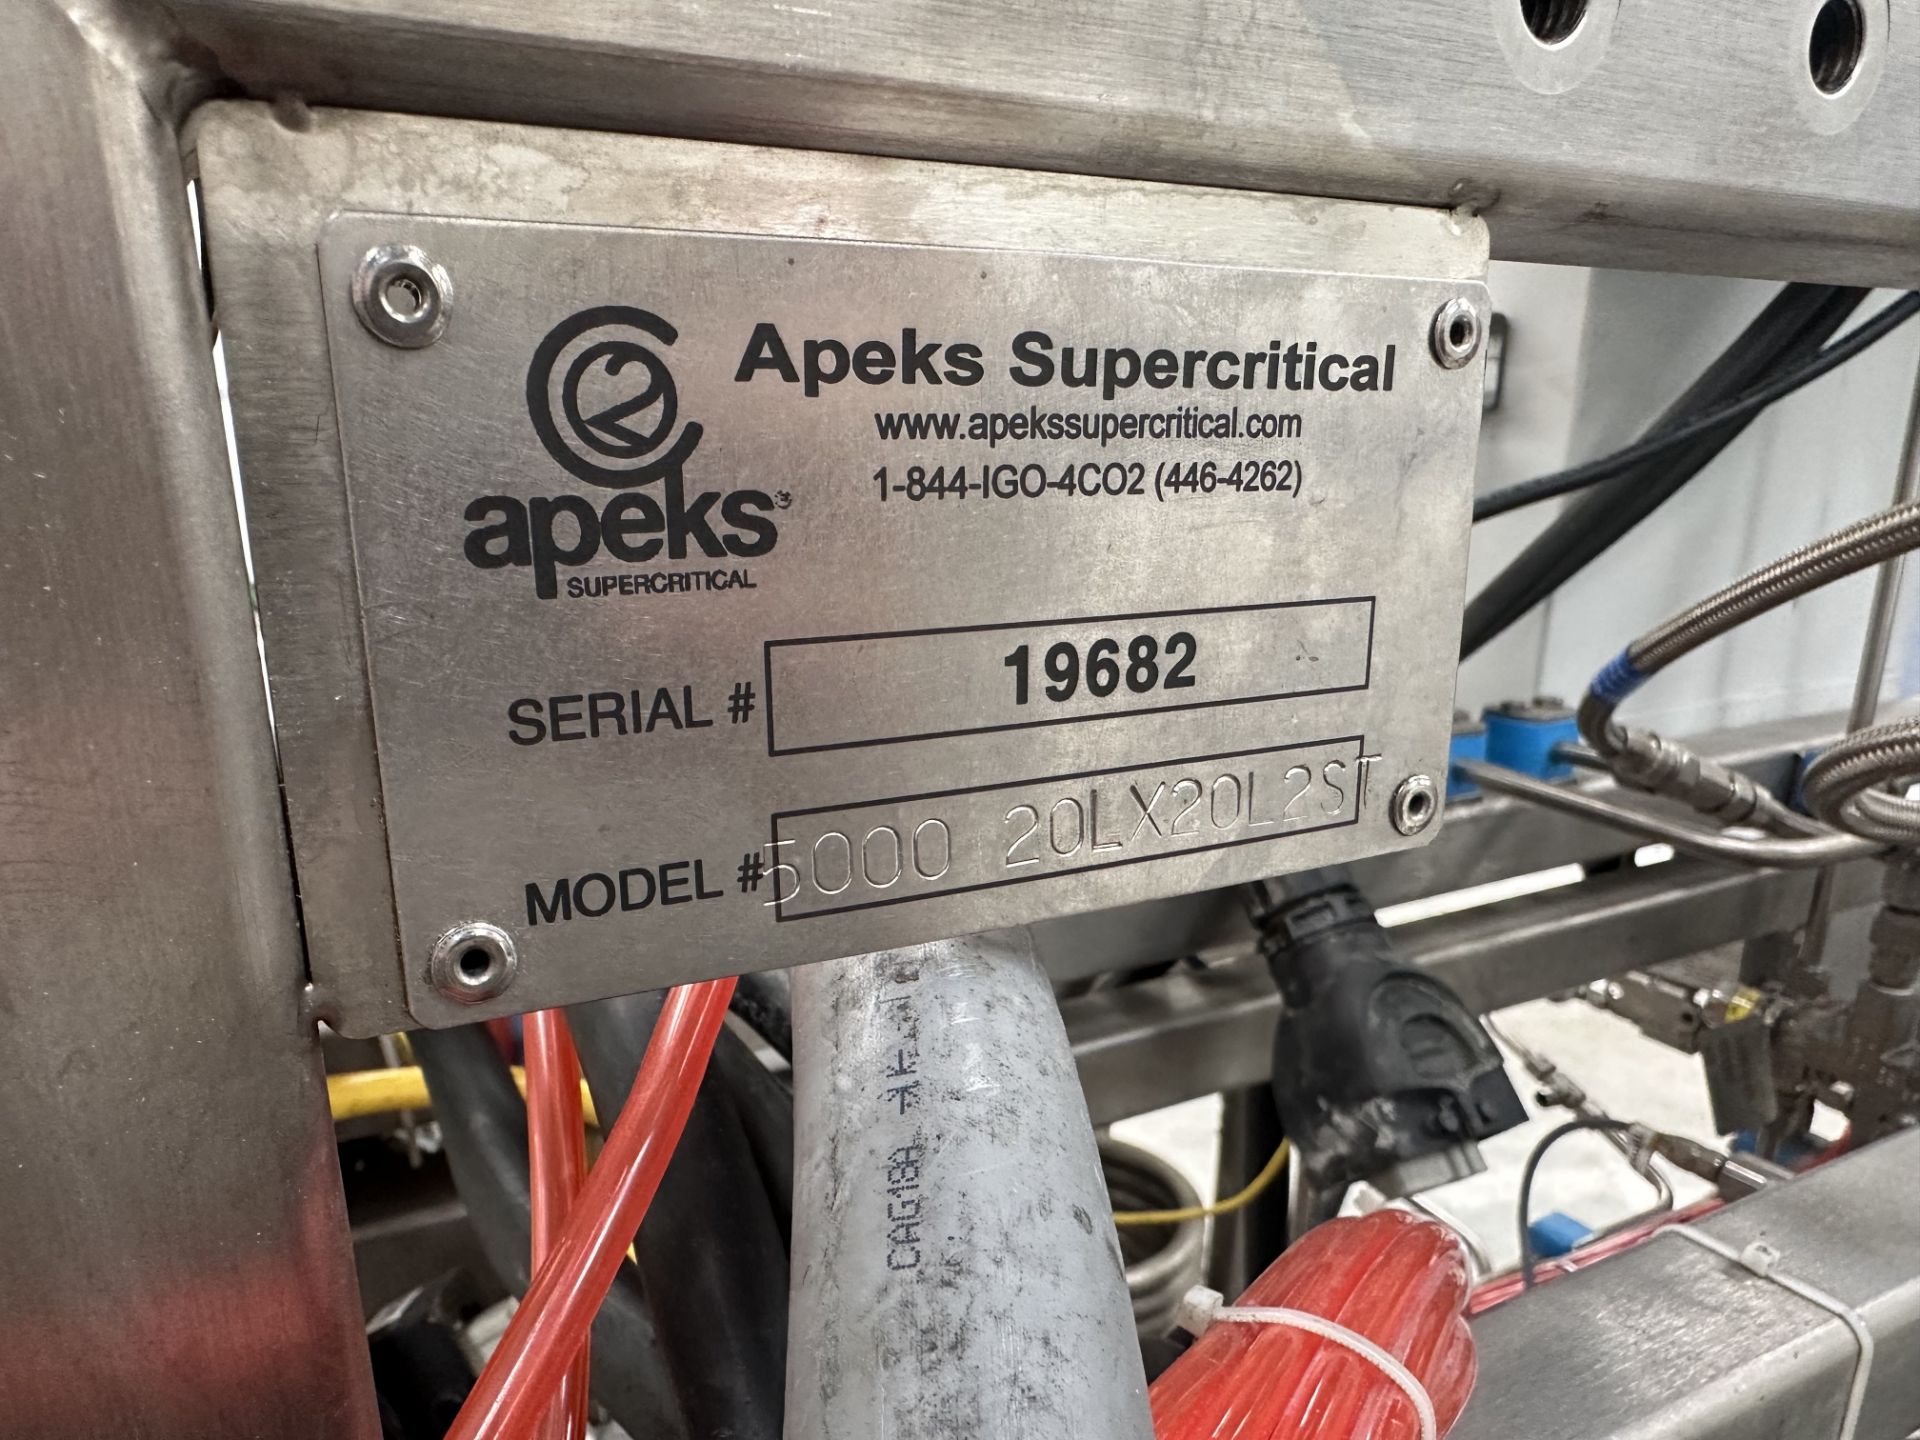 Used Apeks Supercritical CO2 Extraction System w/ (2) Chillers, Air Compressor. Model "The Force" - Image 2 of 35